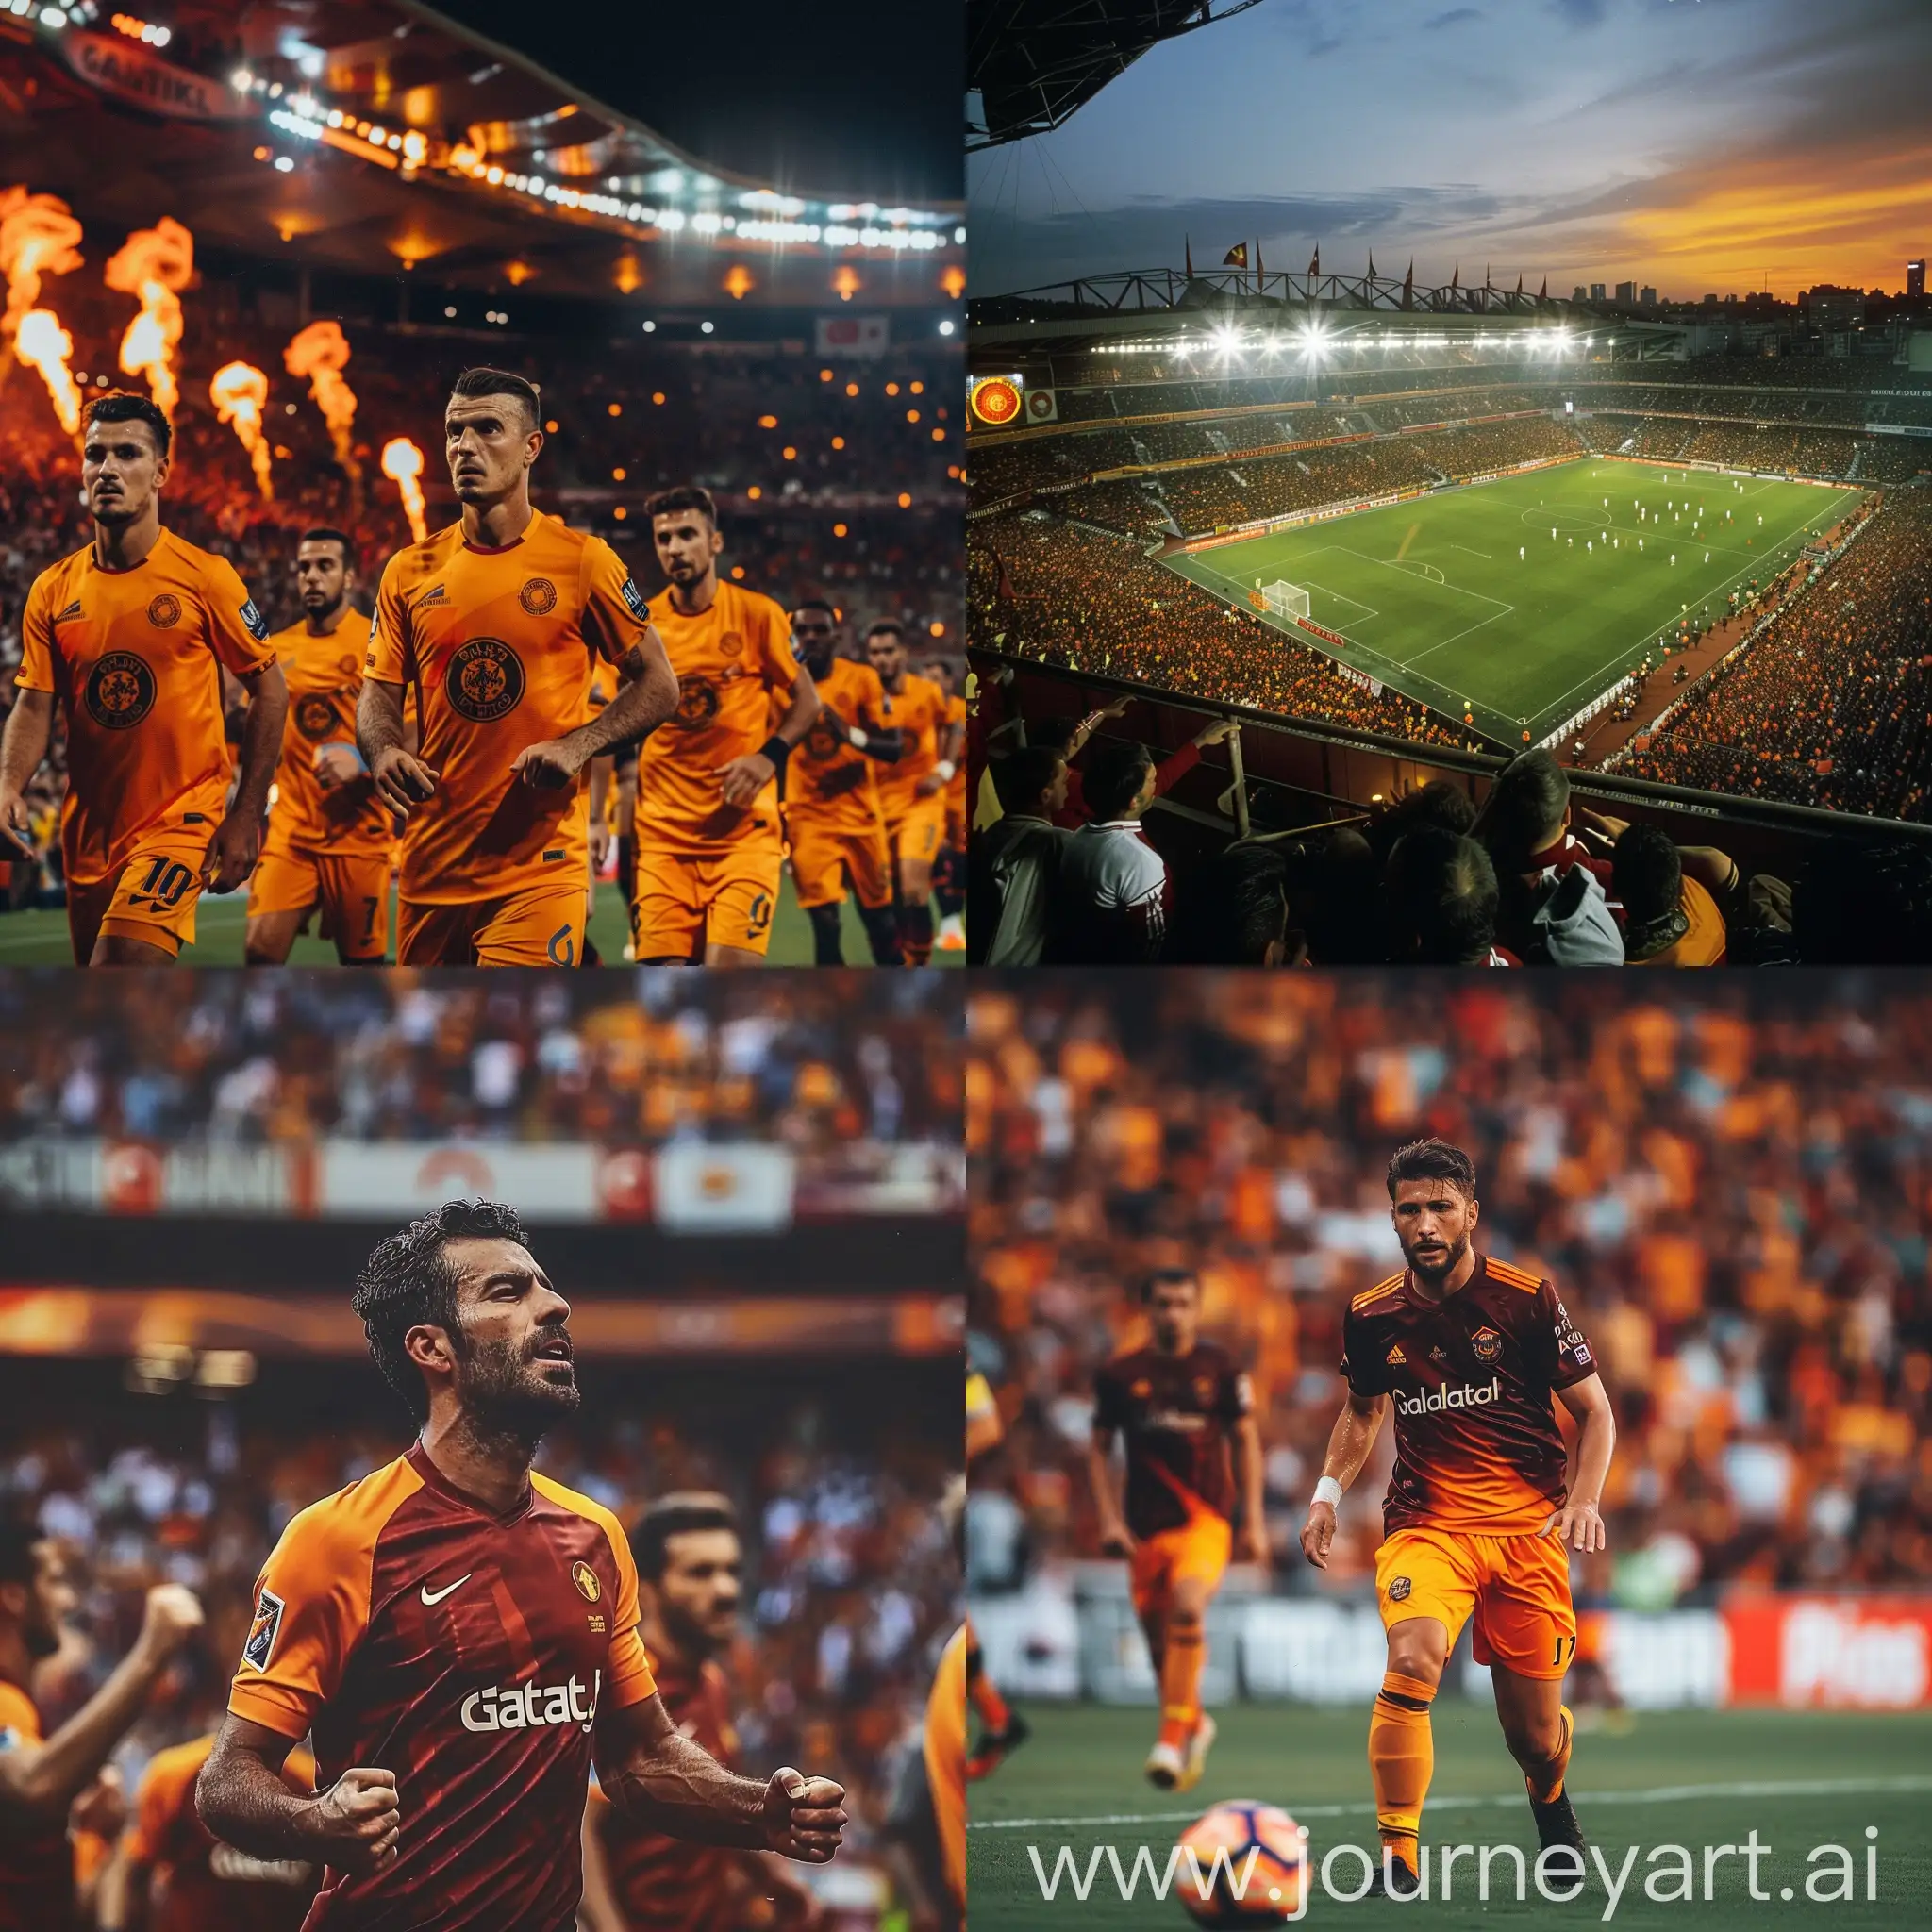 Intense-Galatasaray-Soccer-Match-Ends-in-11-Draw-No-97883